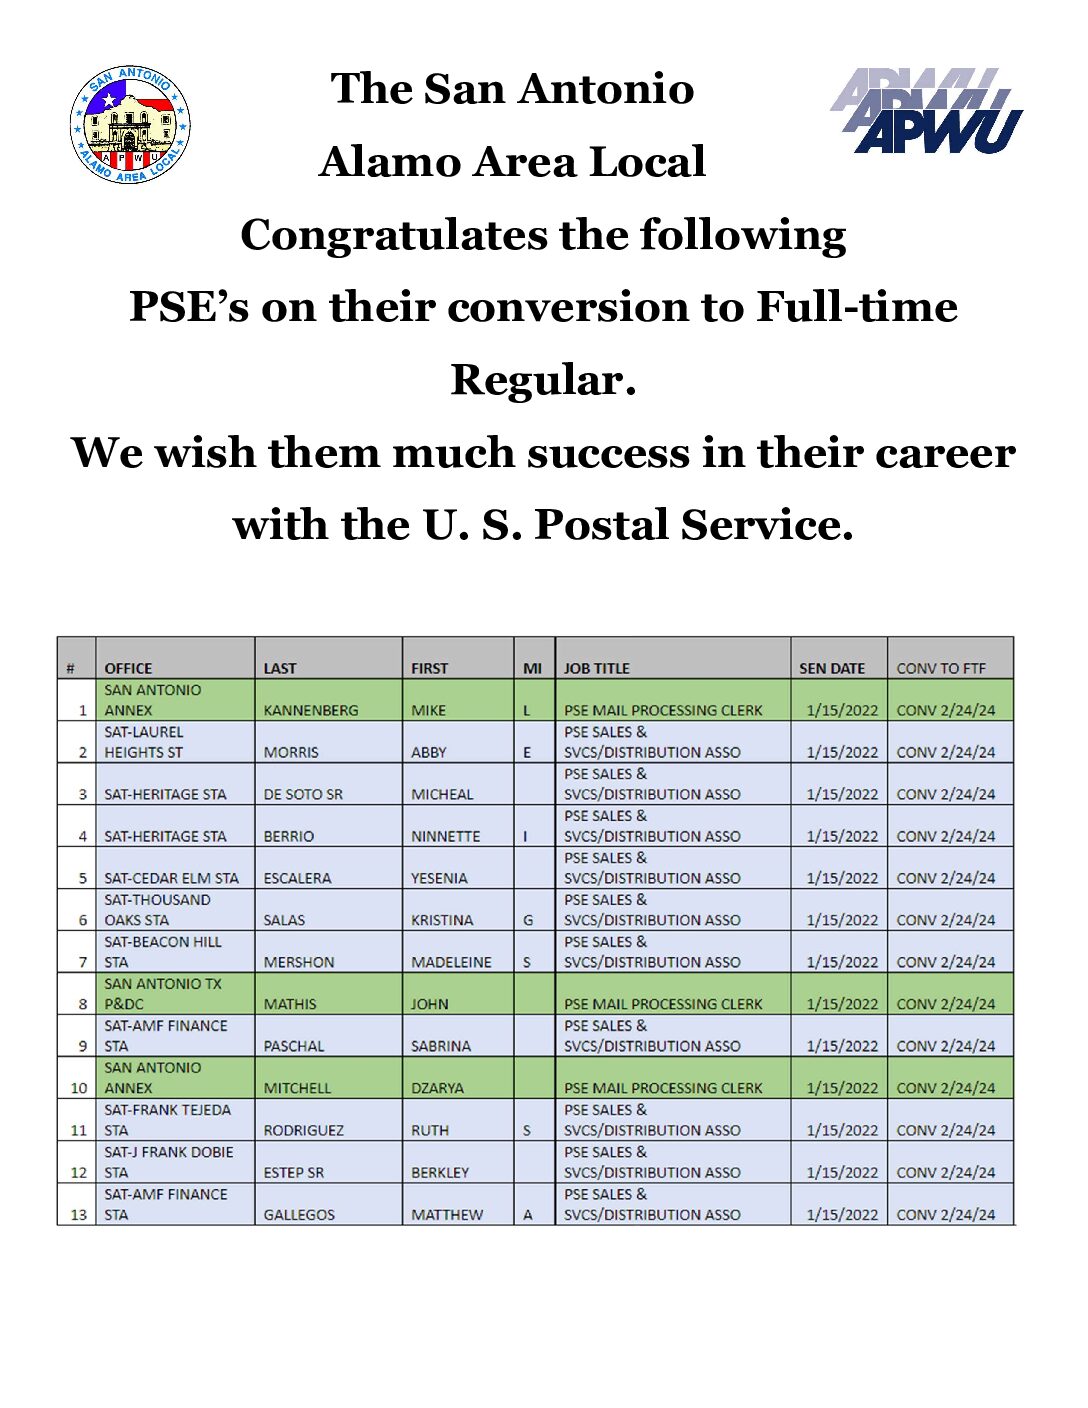 Congratulations to PSEs Converted to Full-Time Regular 2/24/24 - 